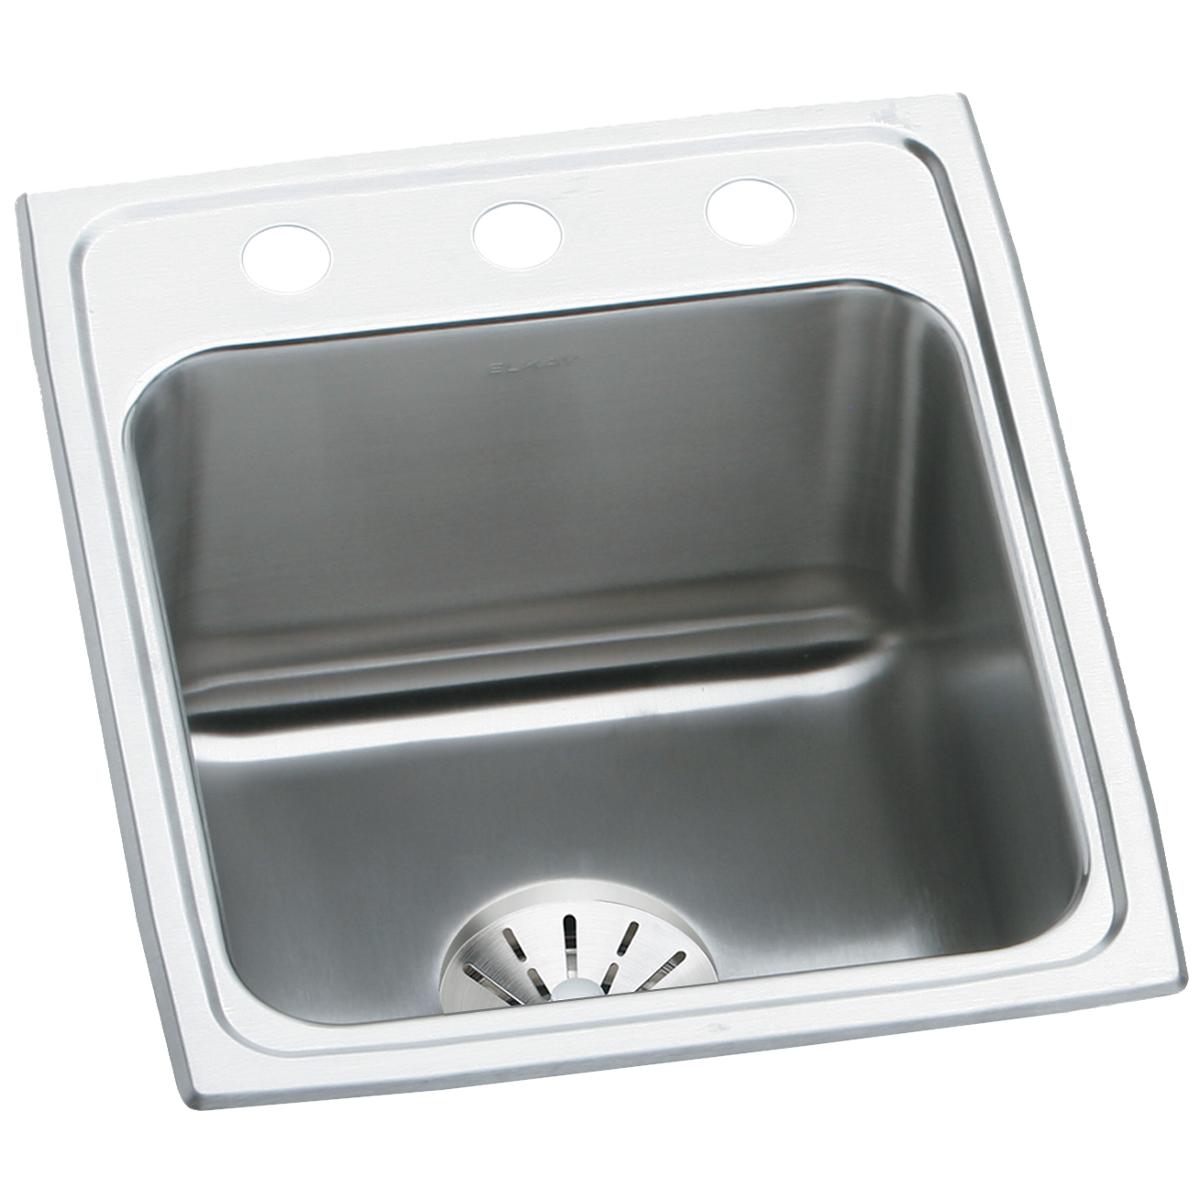 Elkay Lustertone Classic 17" x 22" x 10-1/8" Single Bowl Drop-in Stainless Steel Sink with Perfect Drain